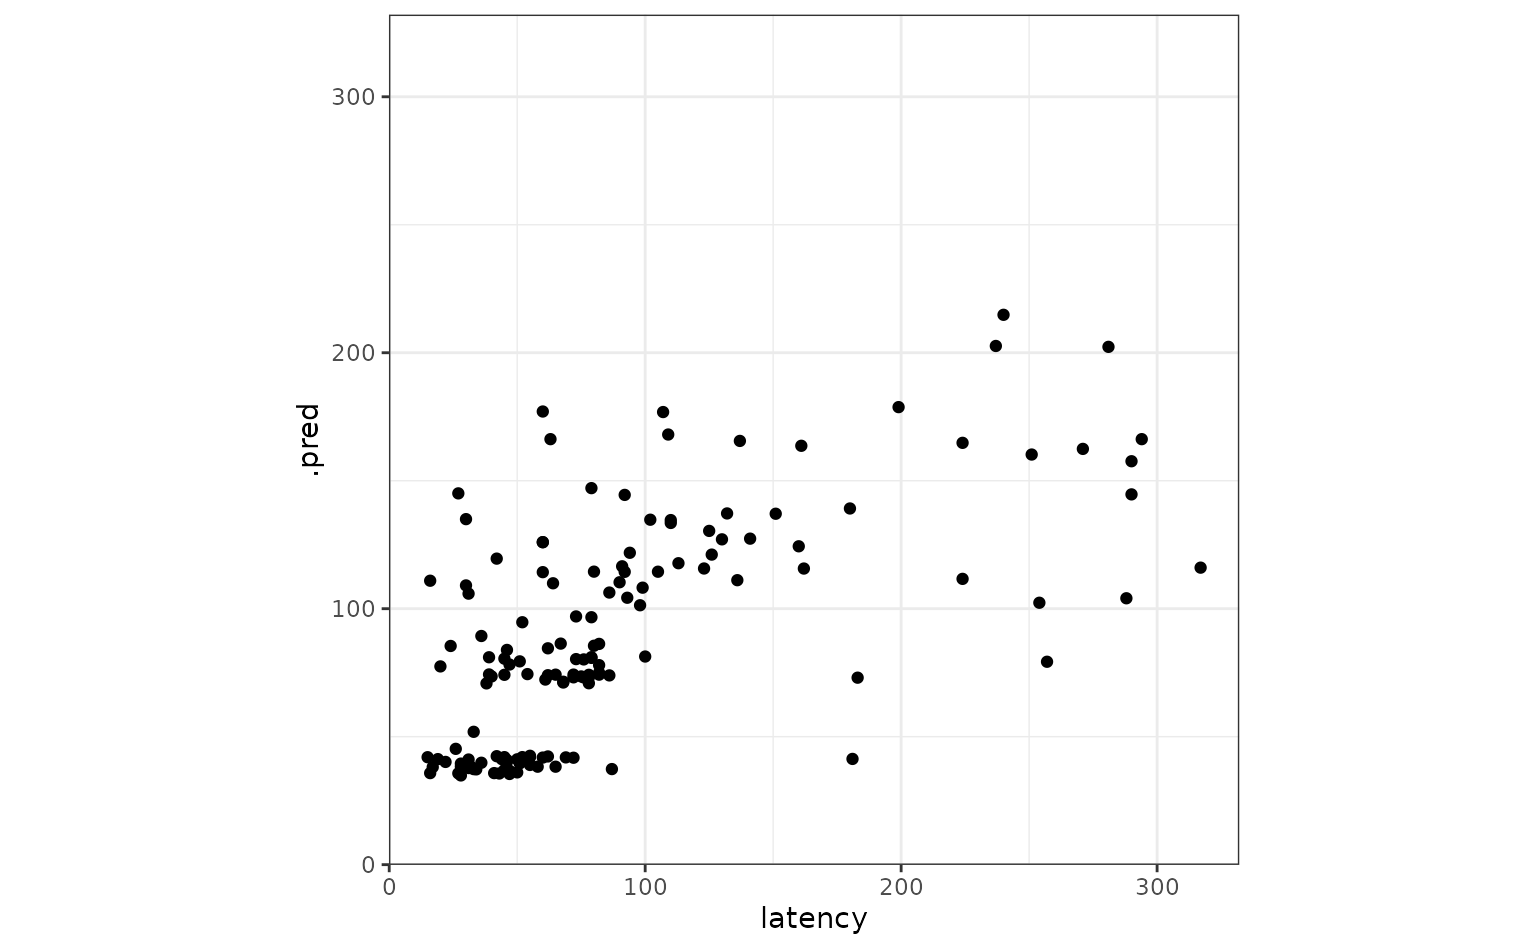 A ggplot scatterplot showing observed versus predicted latency values. While there is indeed a positive and roughly linear relationship, there is certainly patterned structure in the residuals.